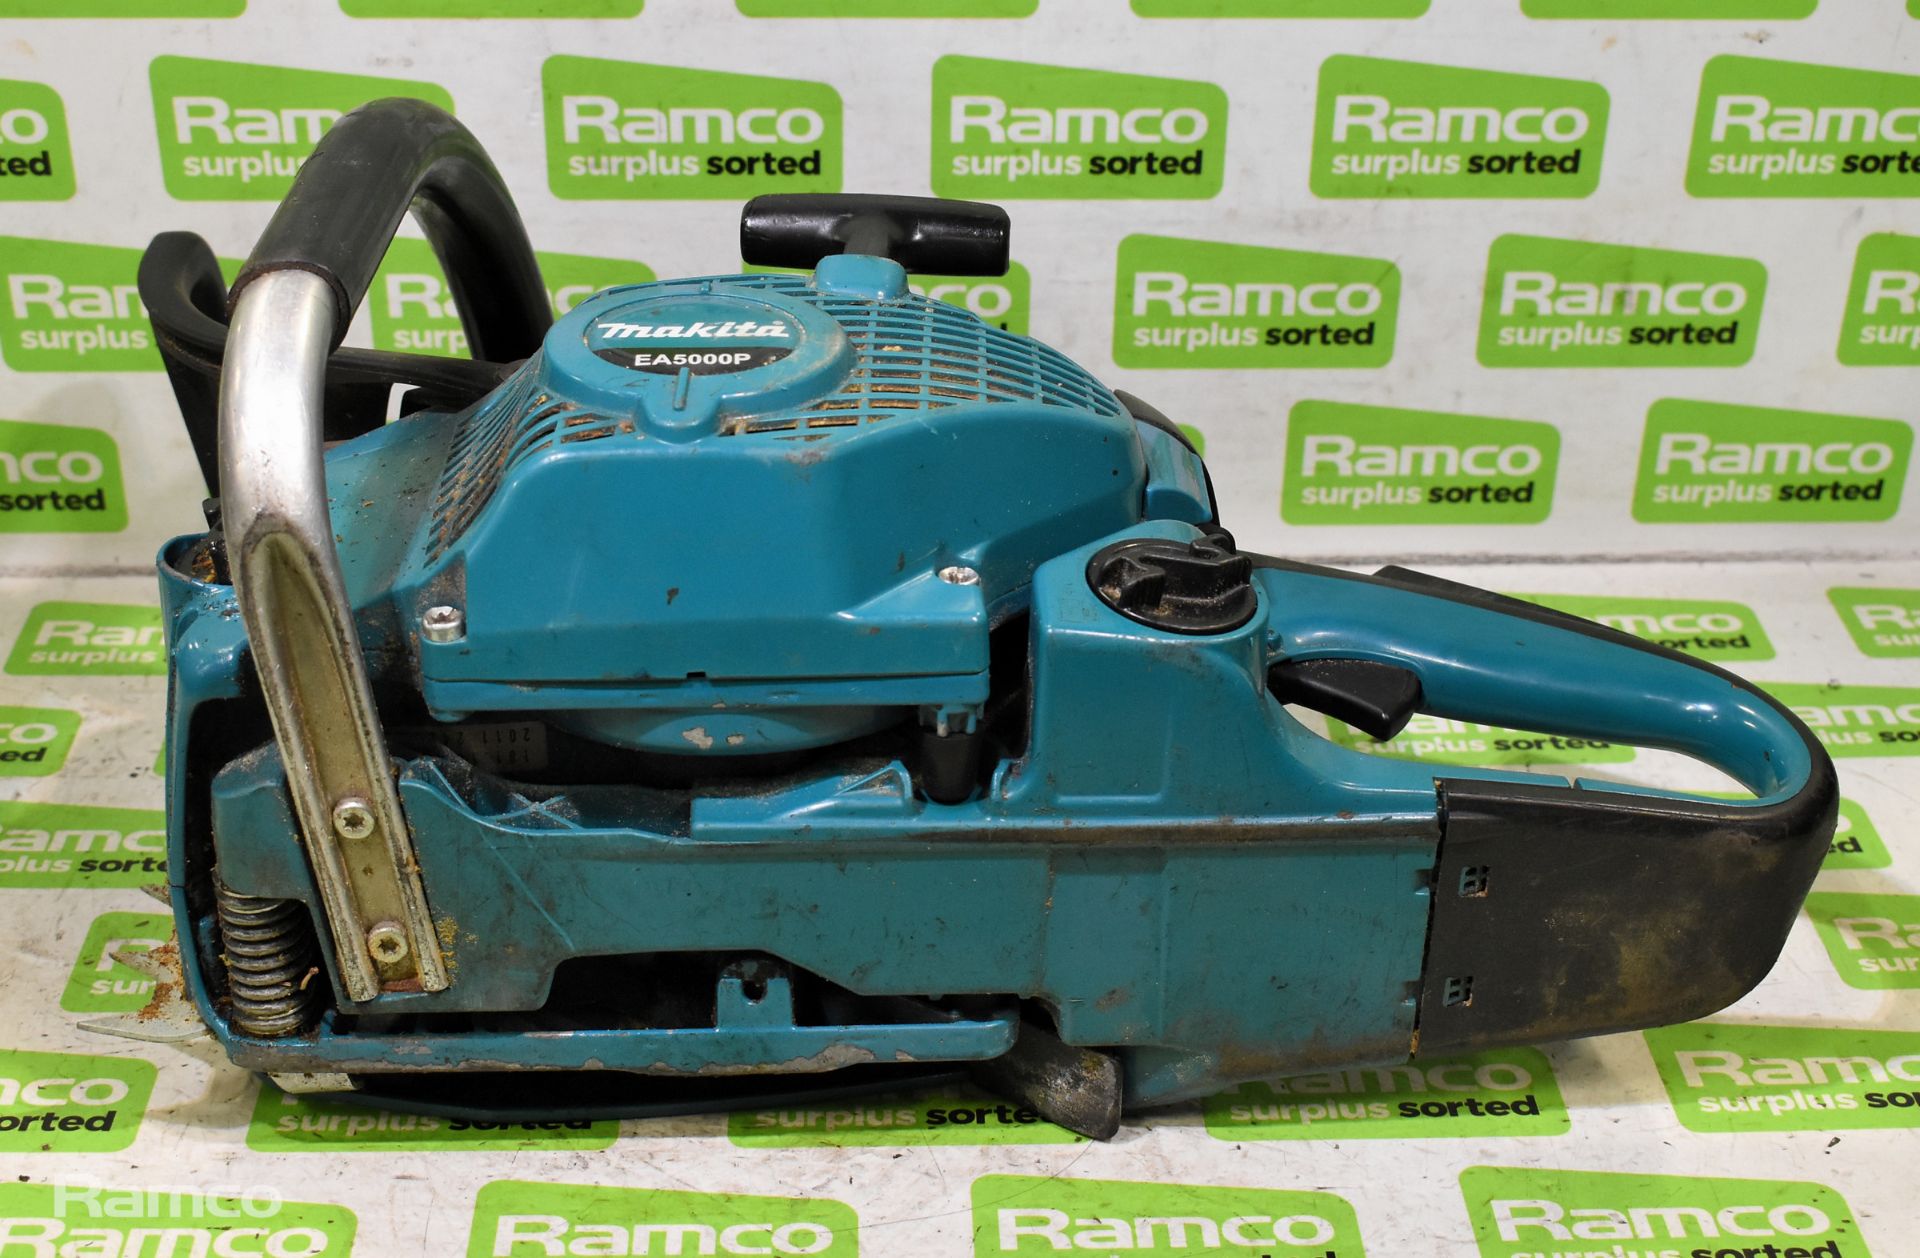 4x Makita DCS5030 50cc petrol chainsaw - BODIES ONLY - AS SPARES AND REPAIRS - Image 21 of 21